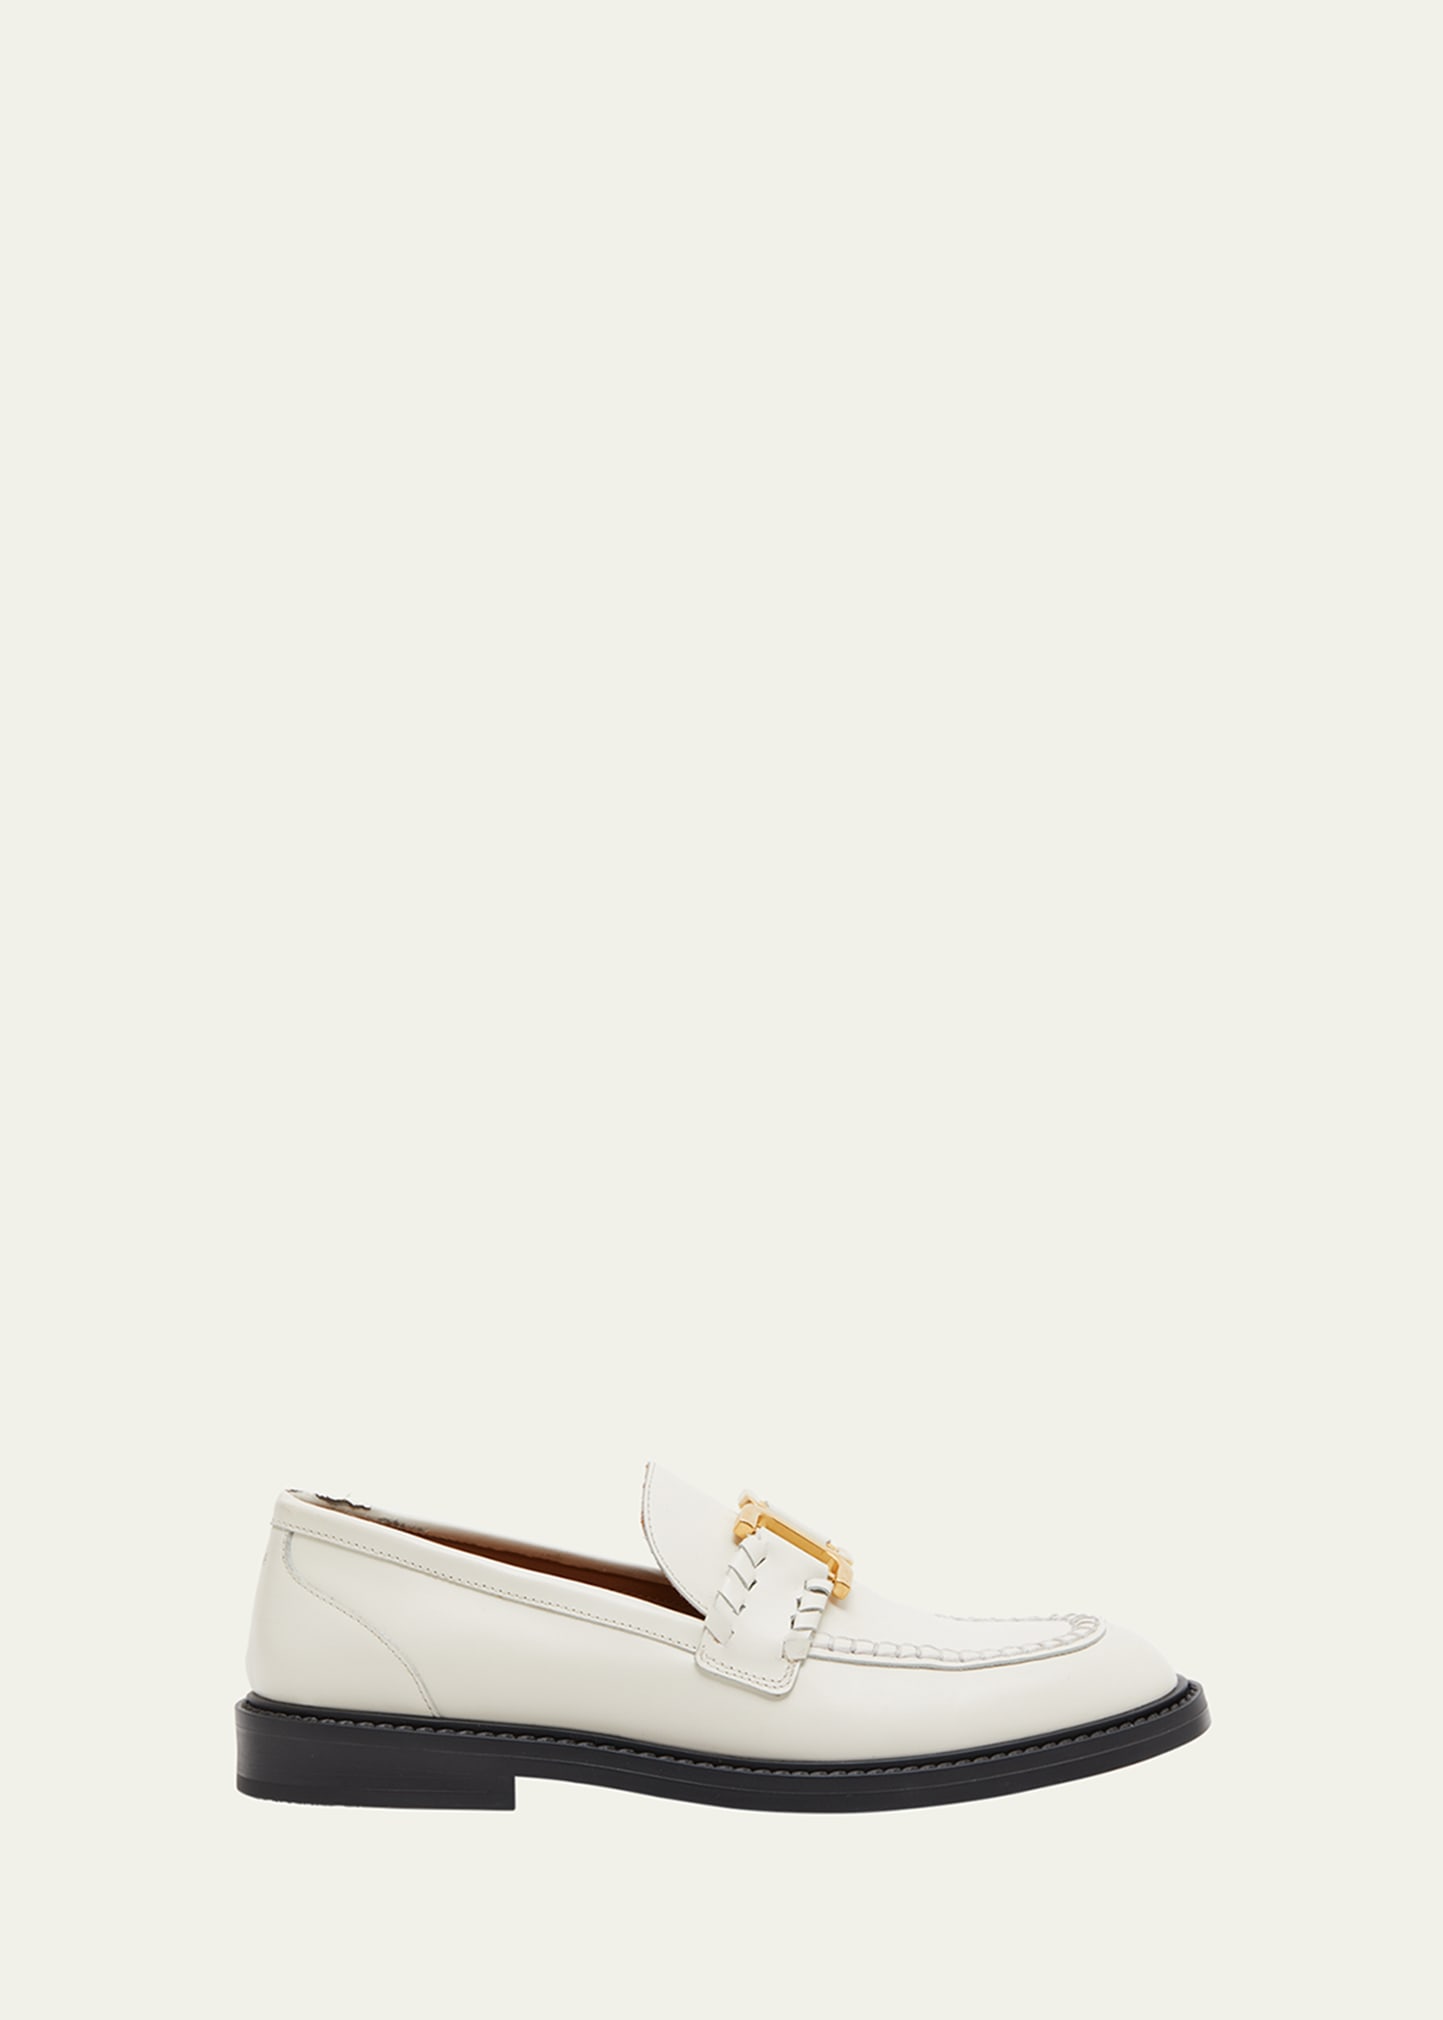 Chloé Marcie Leather Chain Loafers In White